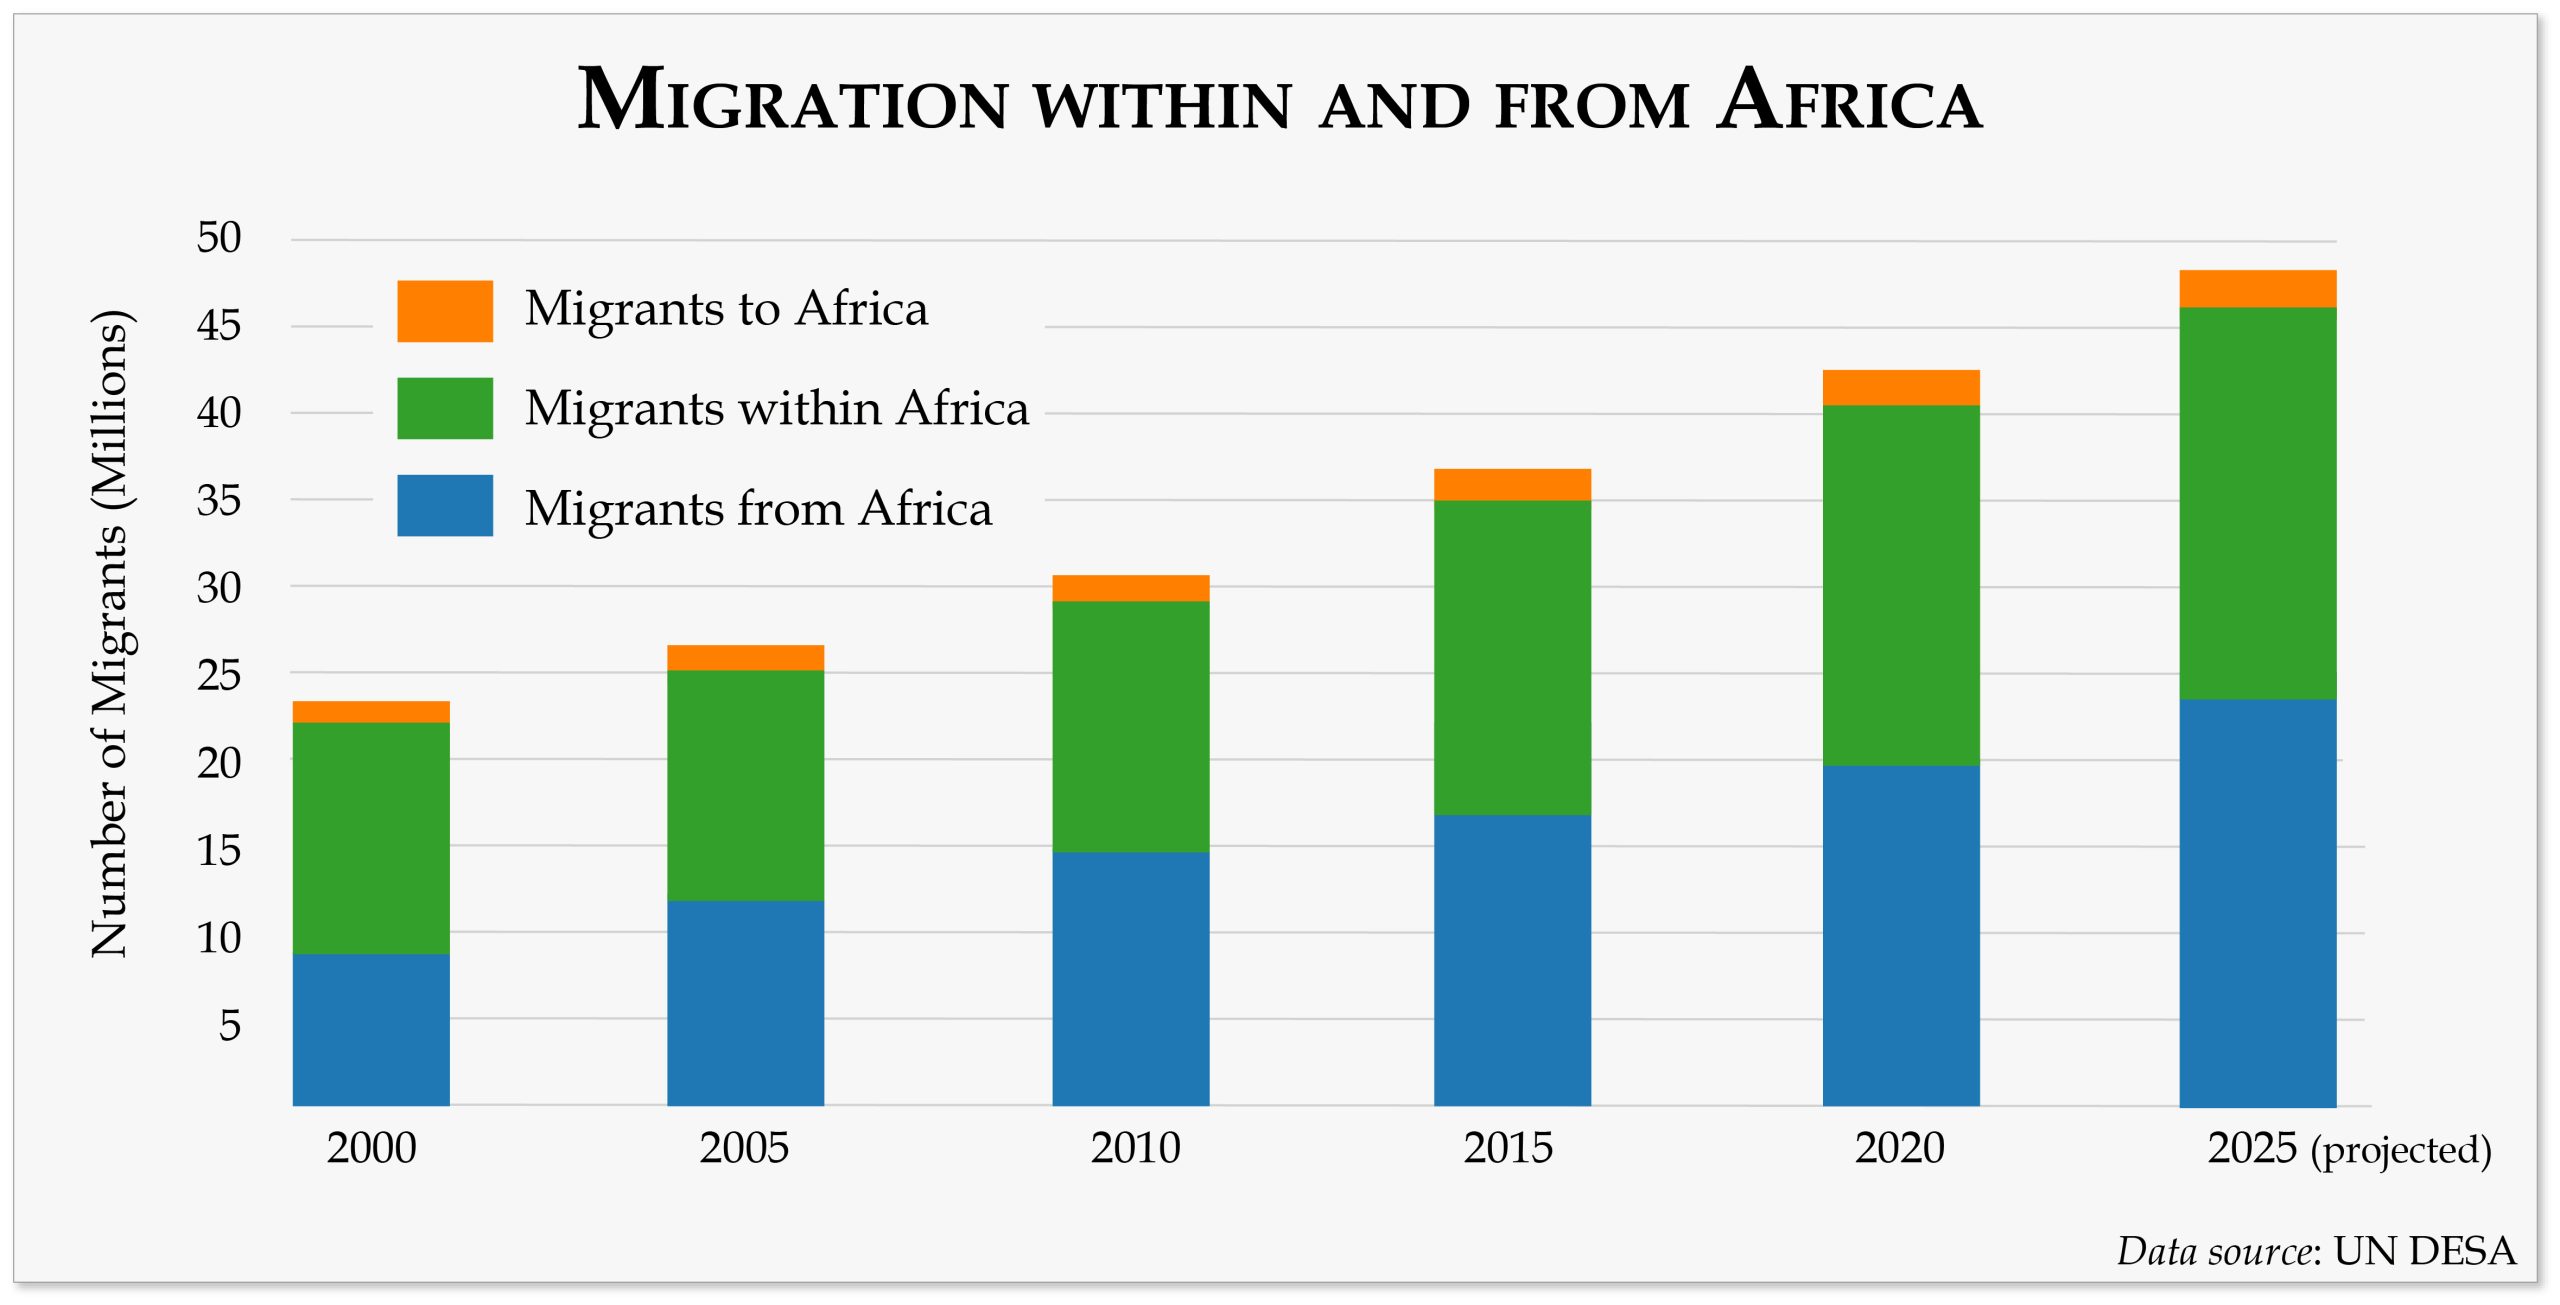 Migration within and from Africa graph 2000-2025